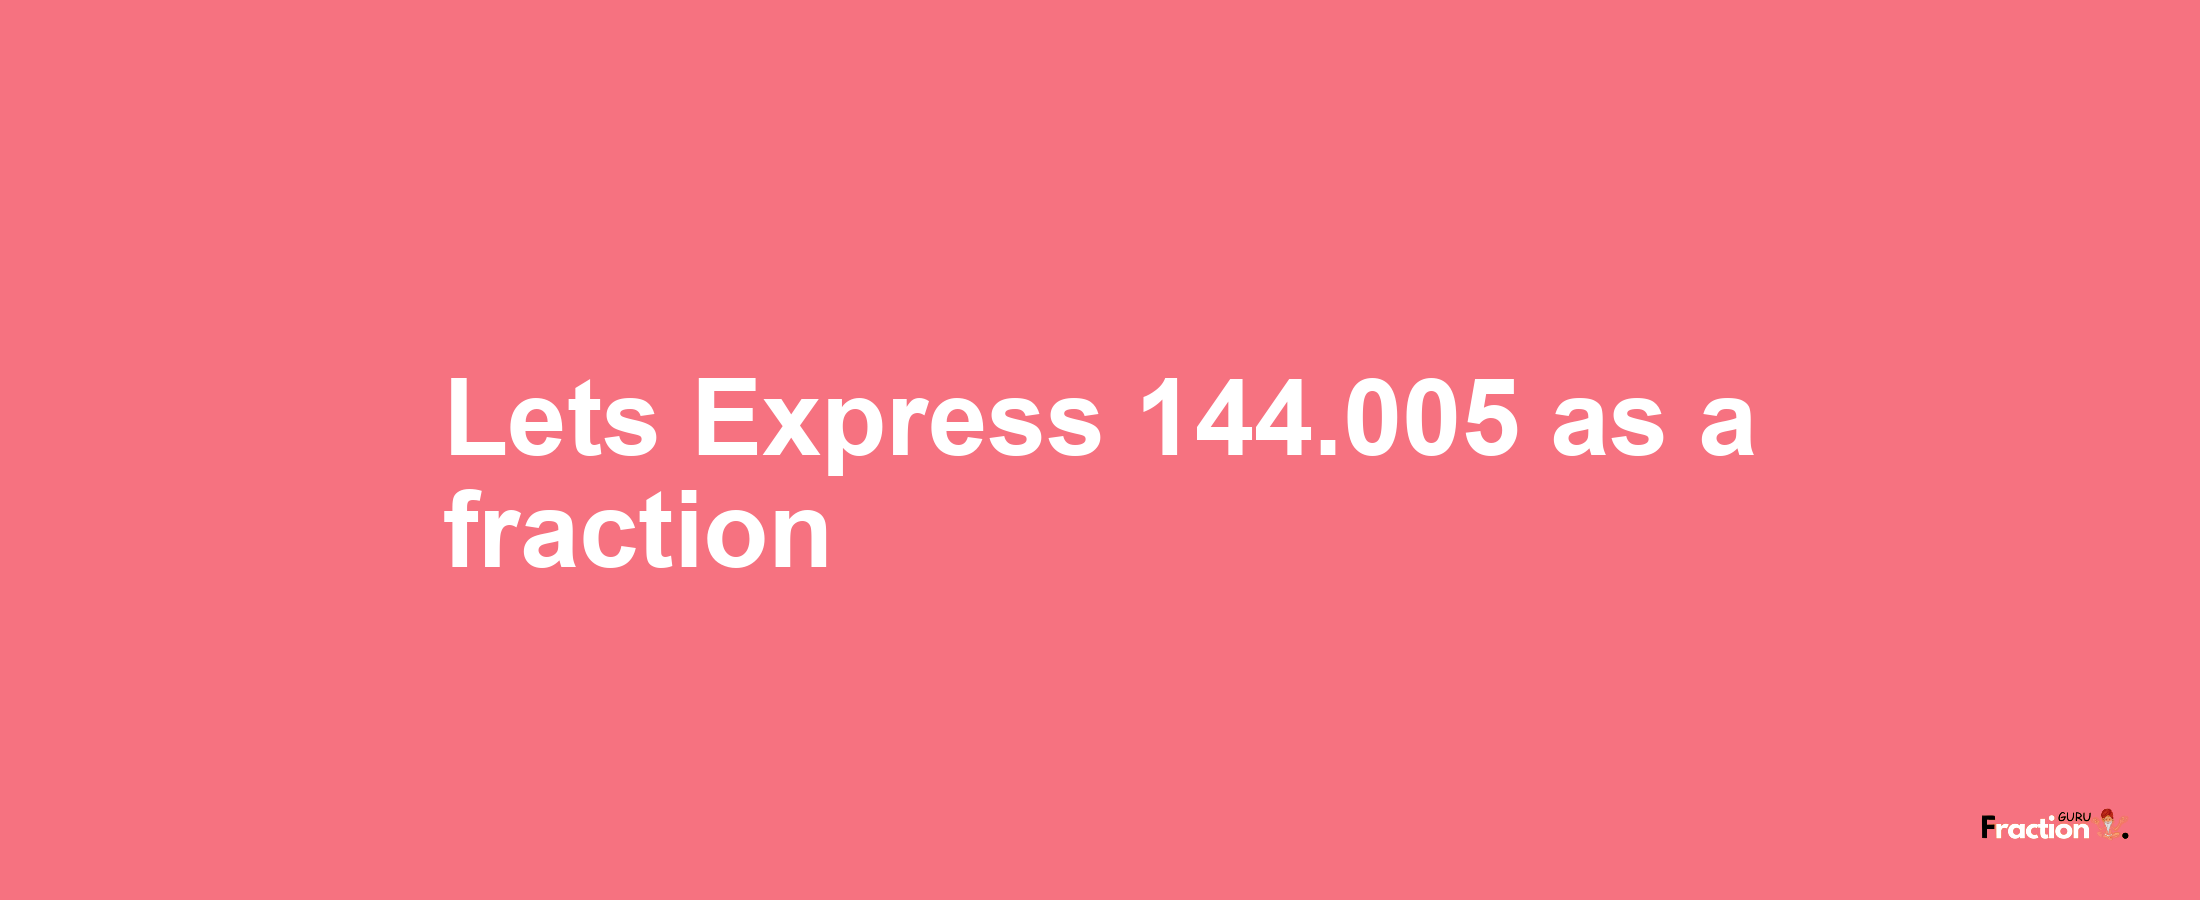 Lets Express 144.005 as afraction